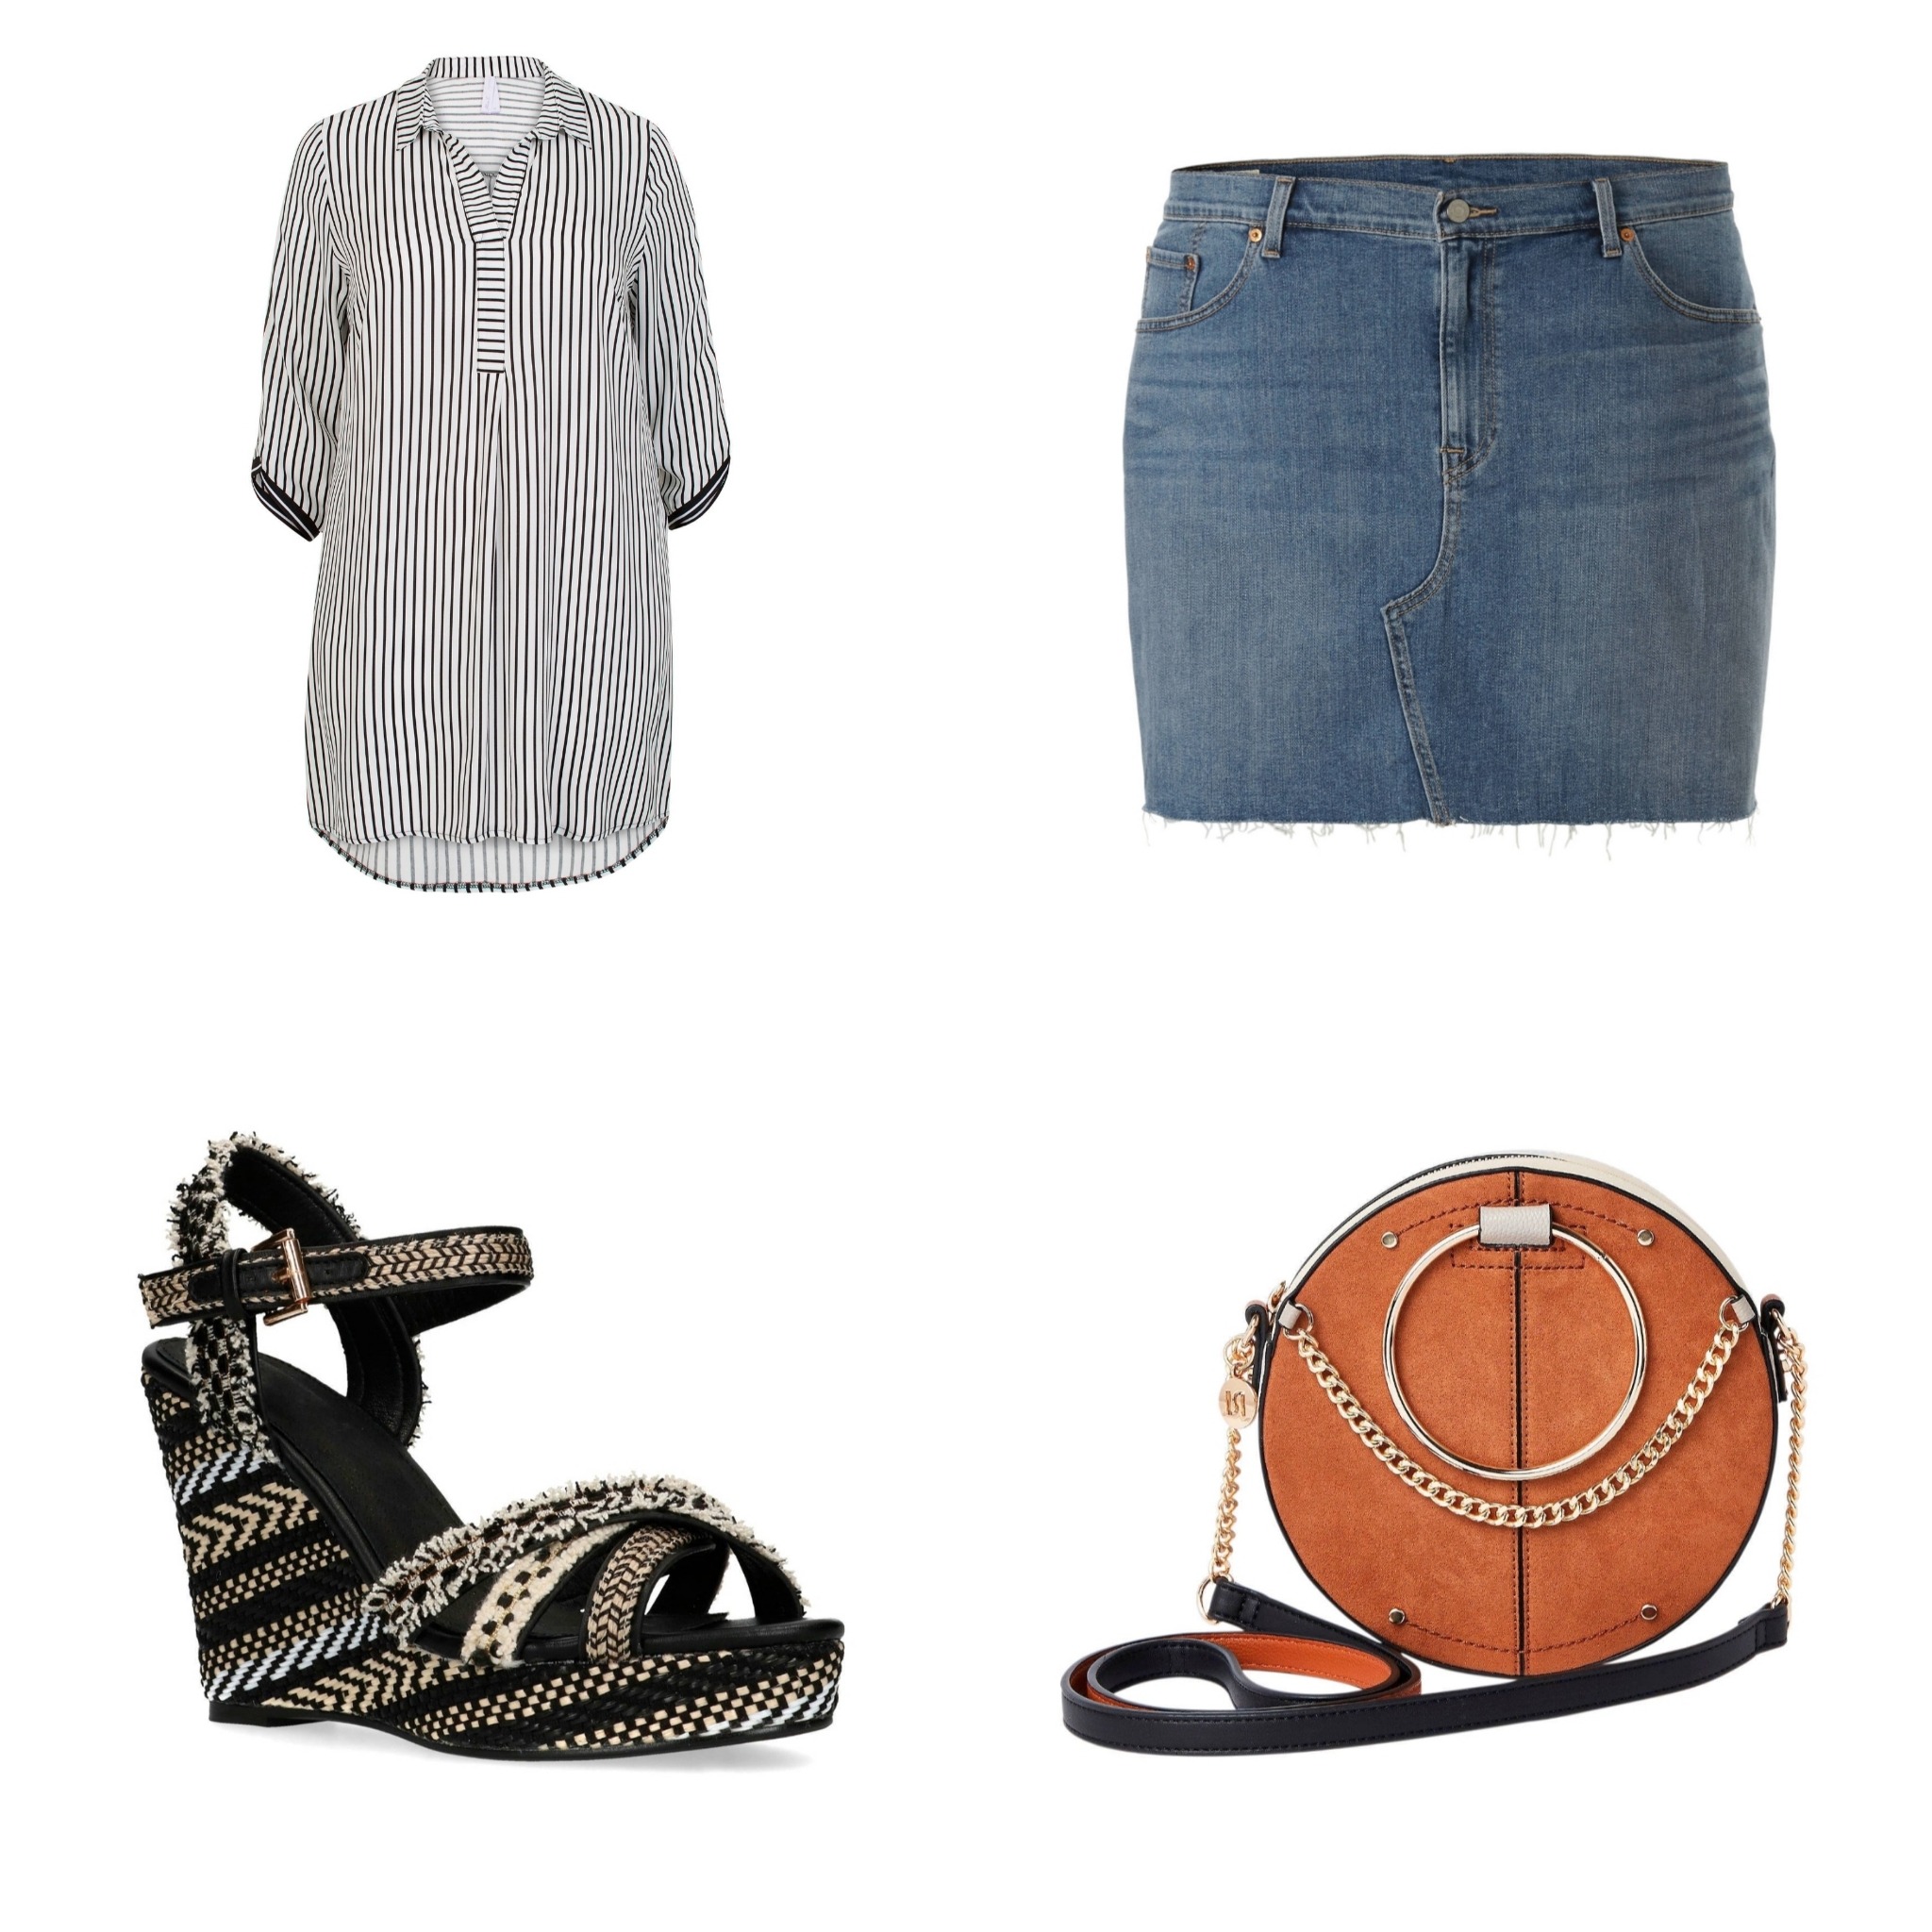 Plus Size Fashion Friday || Jeans skirts